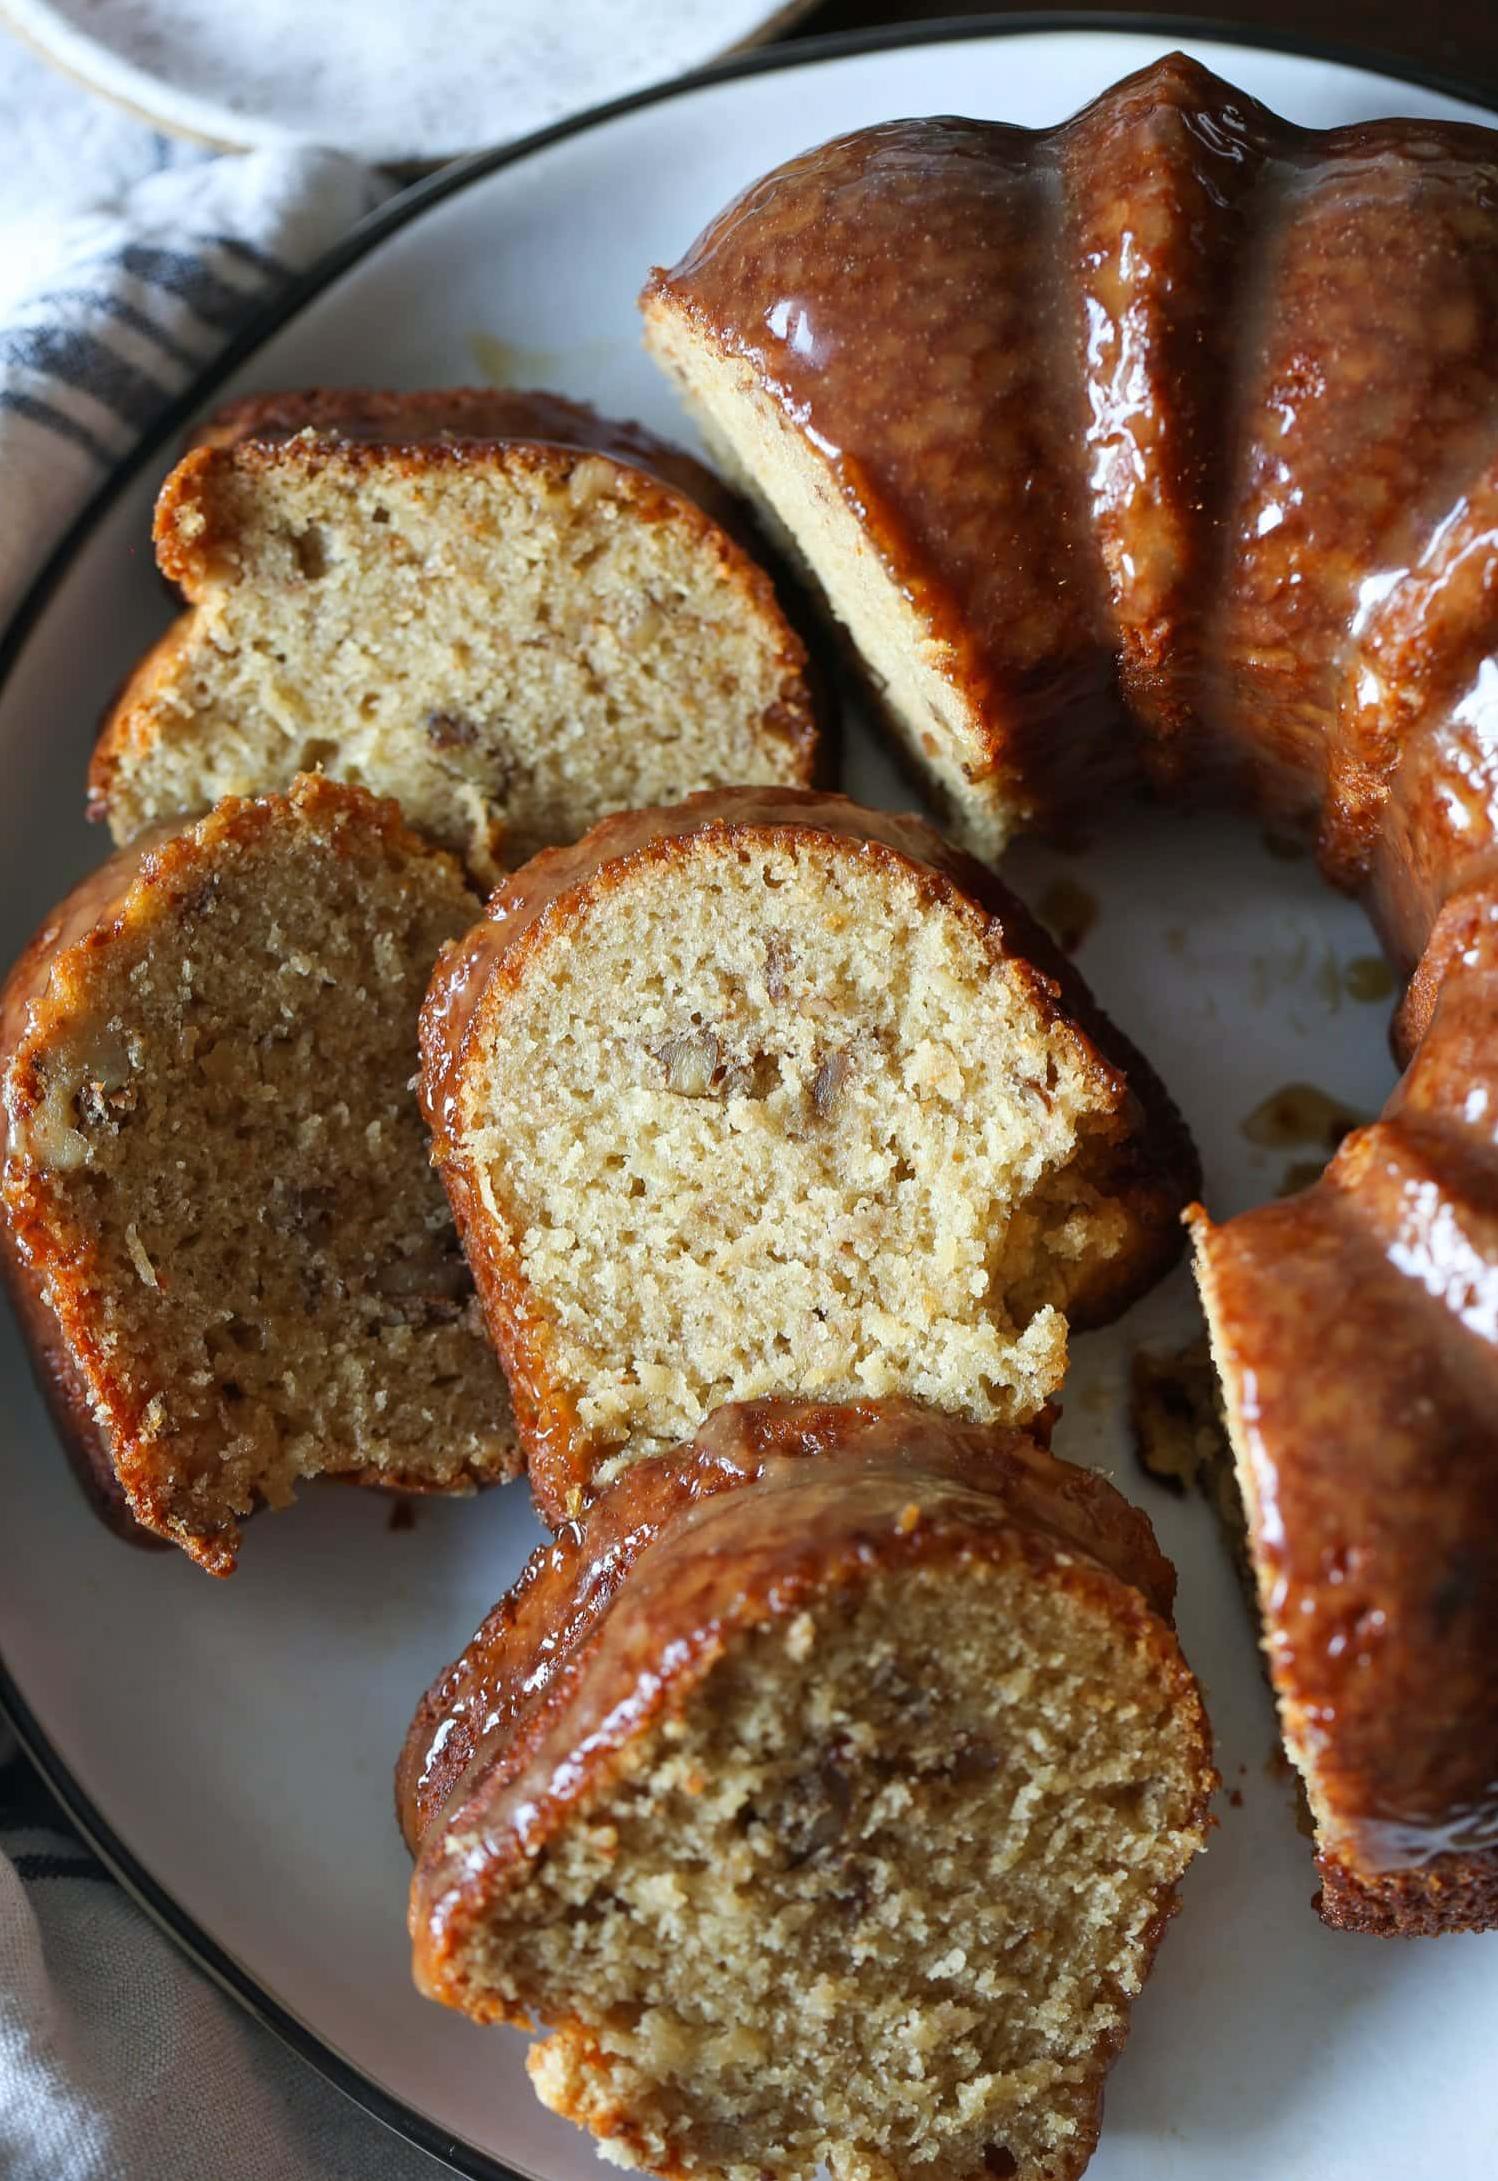  Moist and delicious Banana Pound Cake, freshly baked and ready to be sliced!